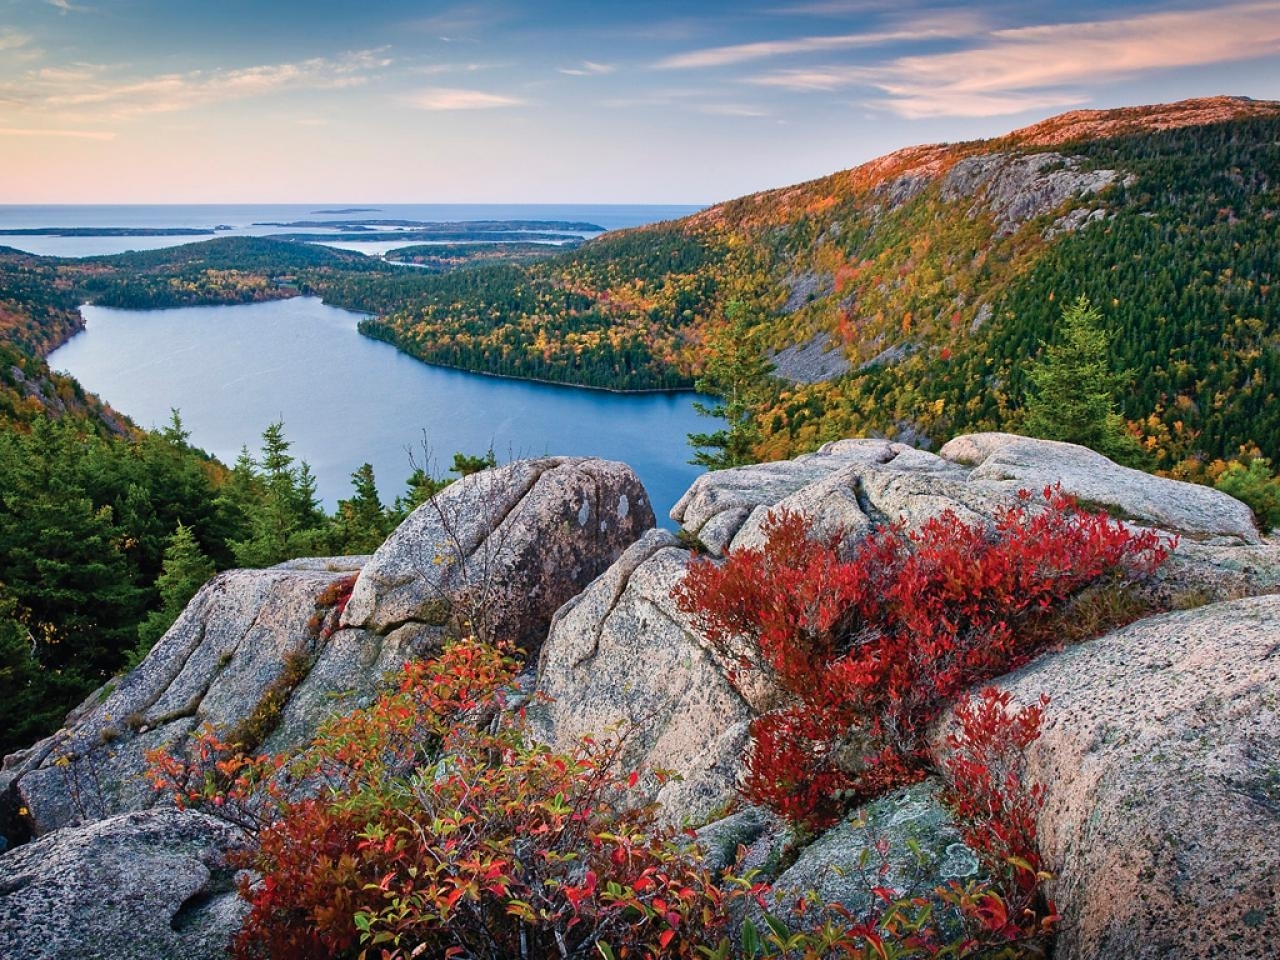 best travel destinations in new england